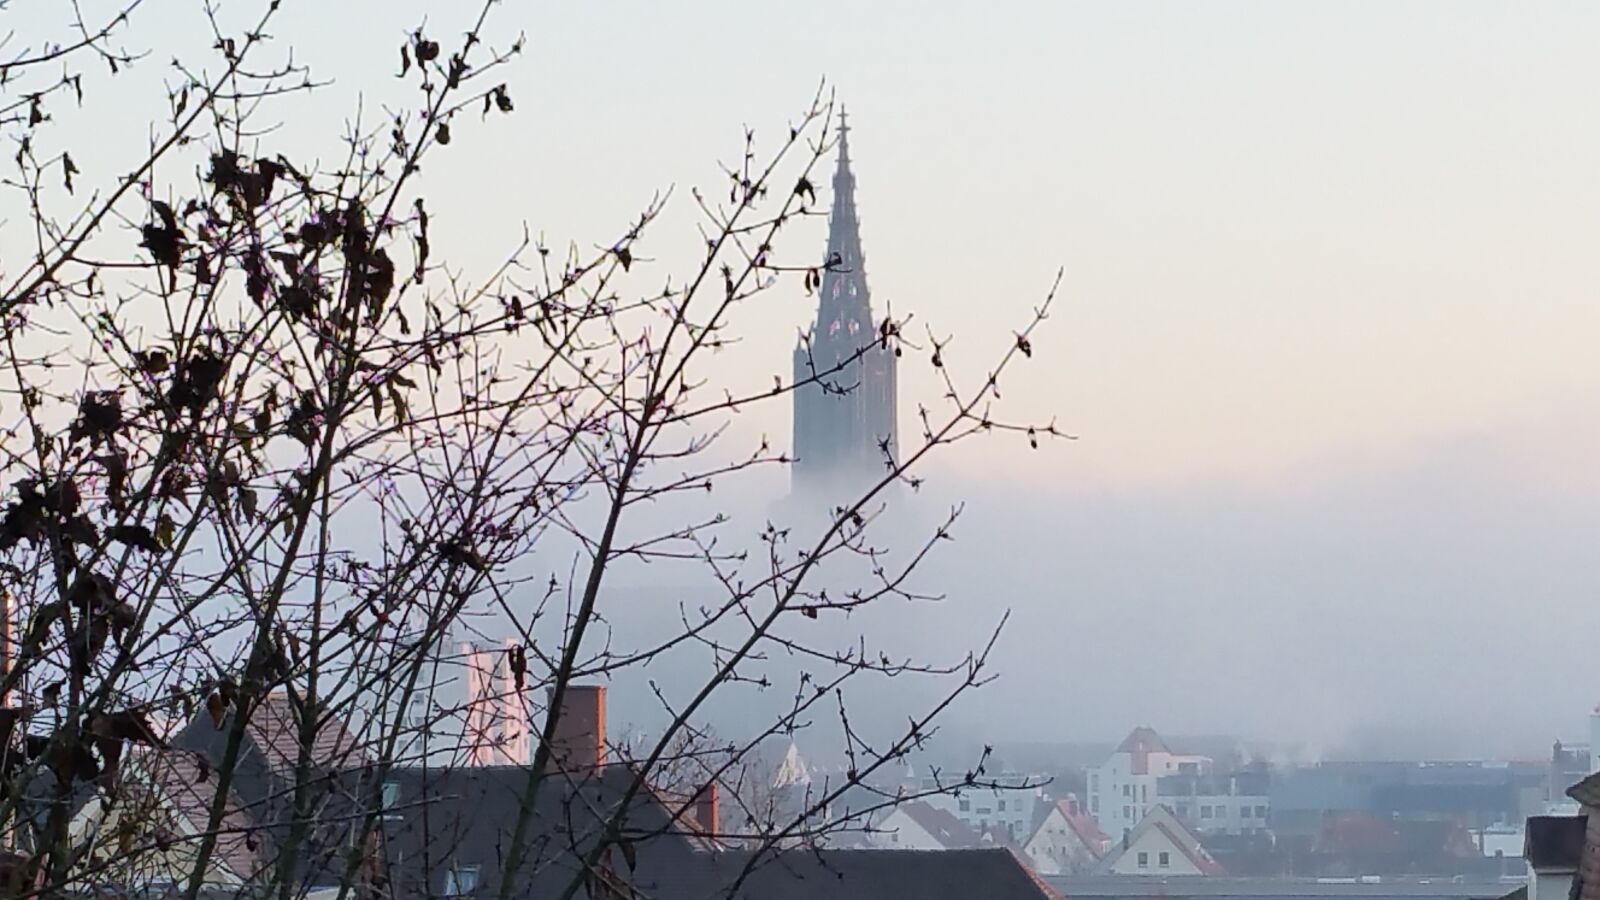 Samsung Galaxy S5 LTE-A sample photo. Ulm cathedral, fog, cold photography